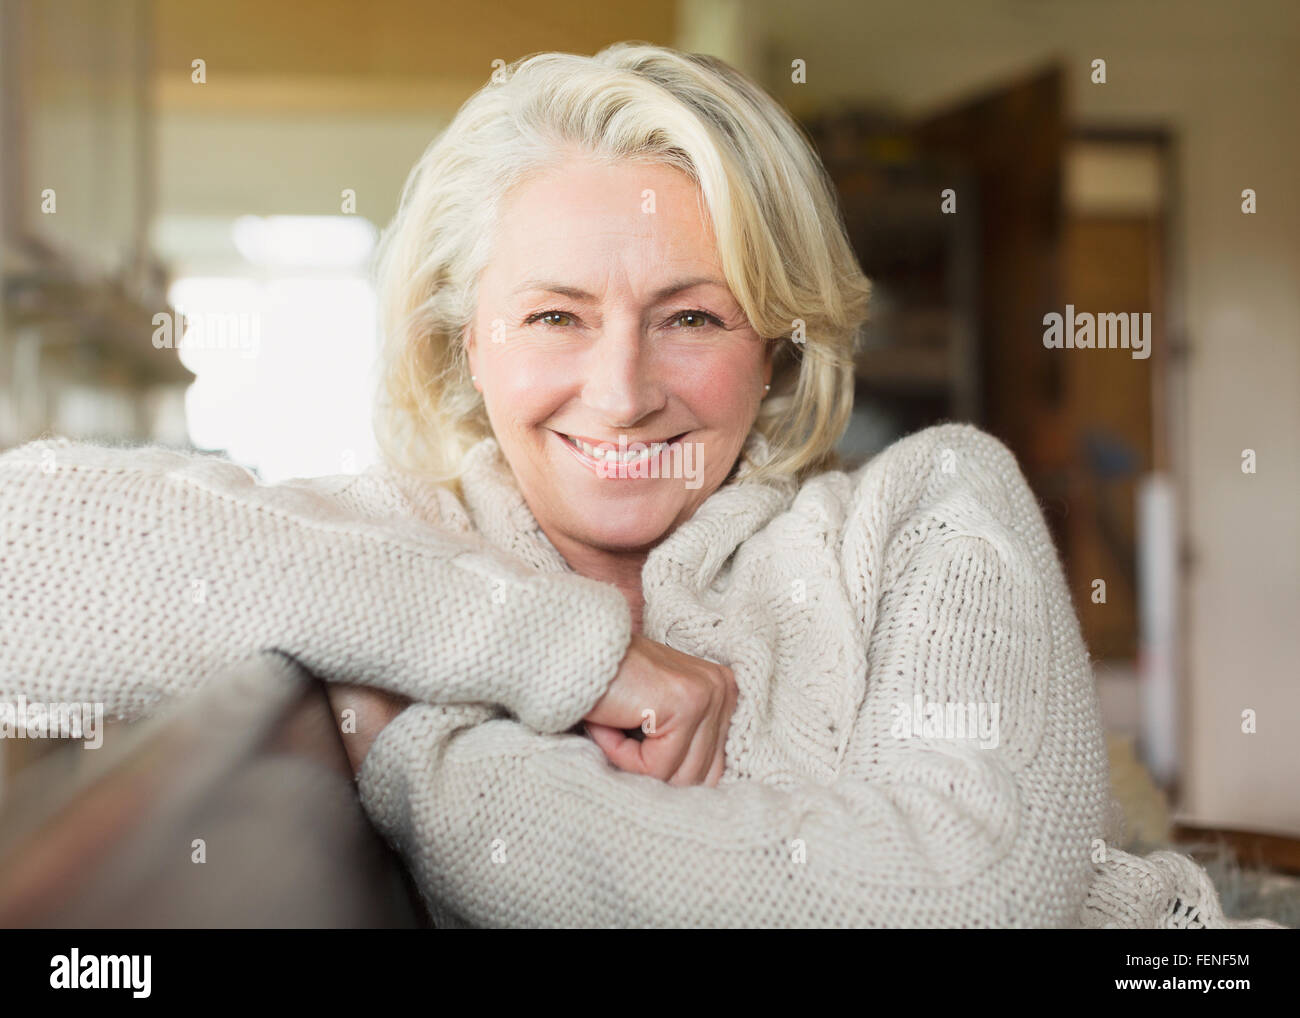 Portrait of smiling senior woman in sweater Banque D'Images